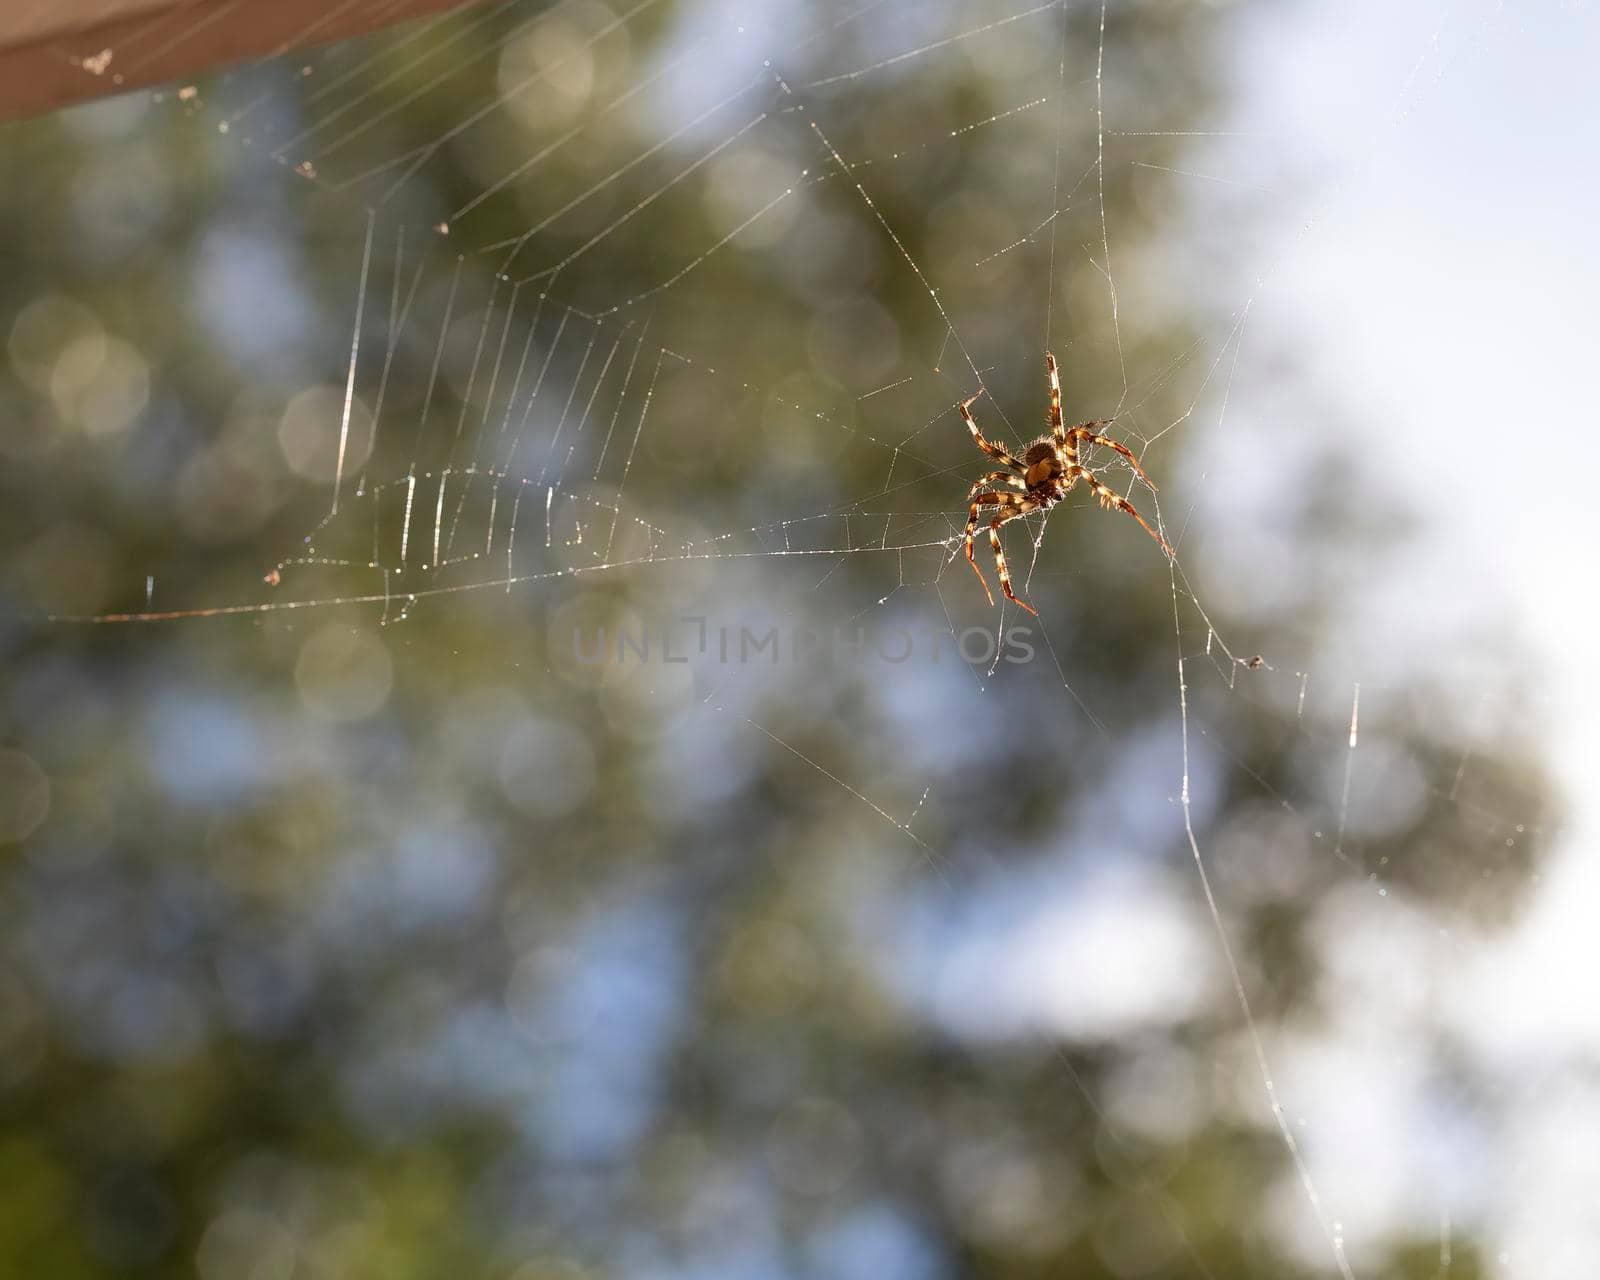 Orb weaver spider on its web backlit by the sun.